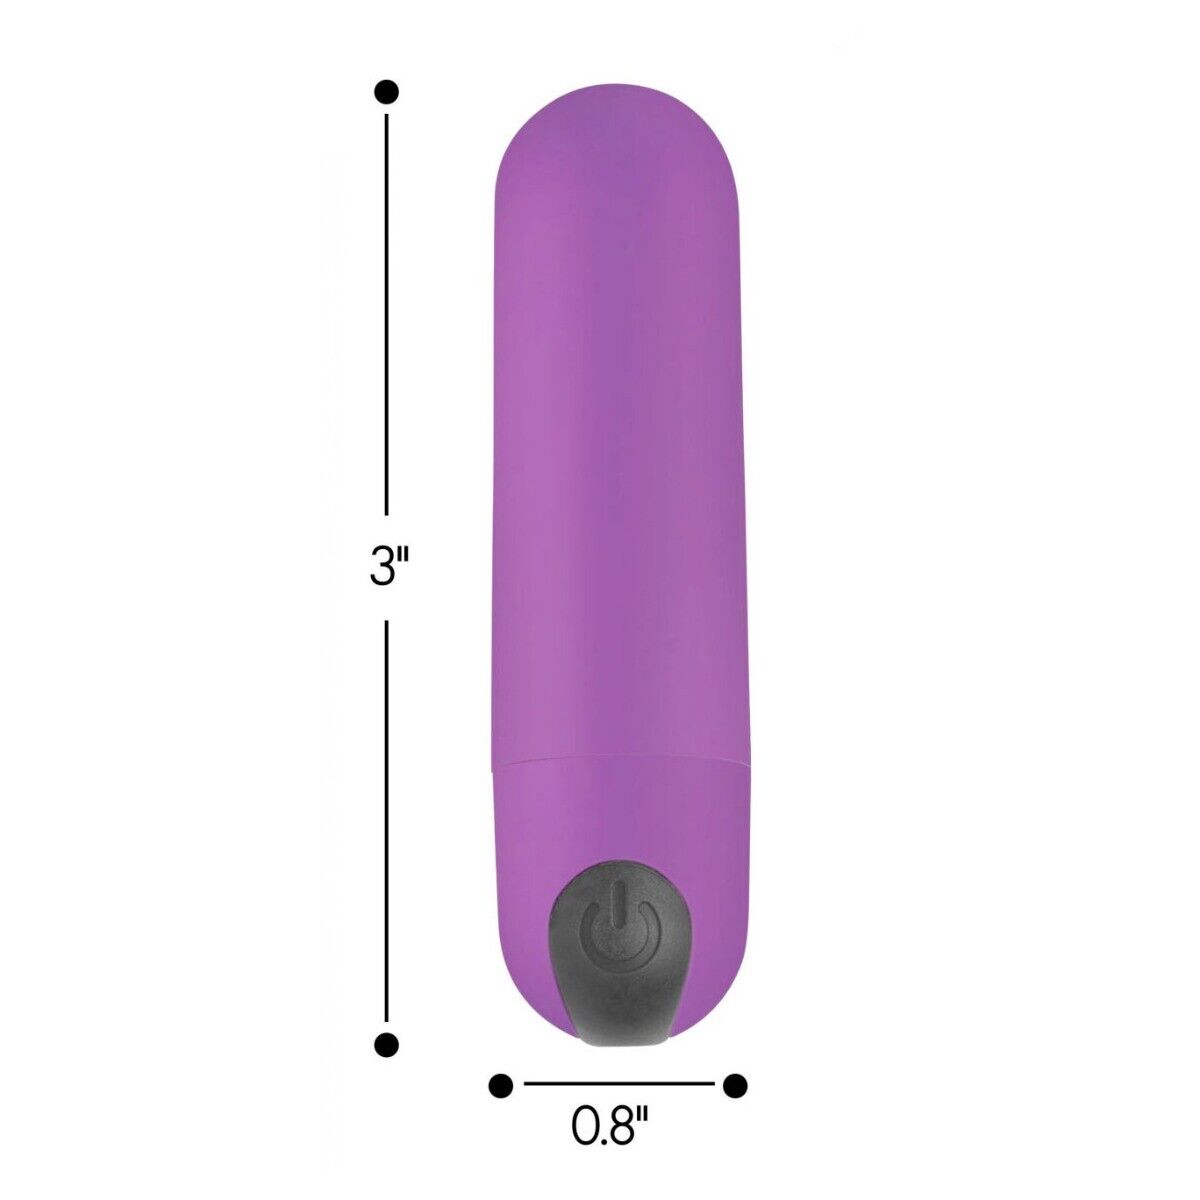 Wireless Remote Control Bullet Clit Nipple Vibrator Sex-toys for Women Couples